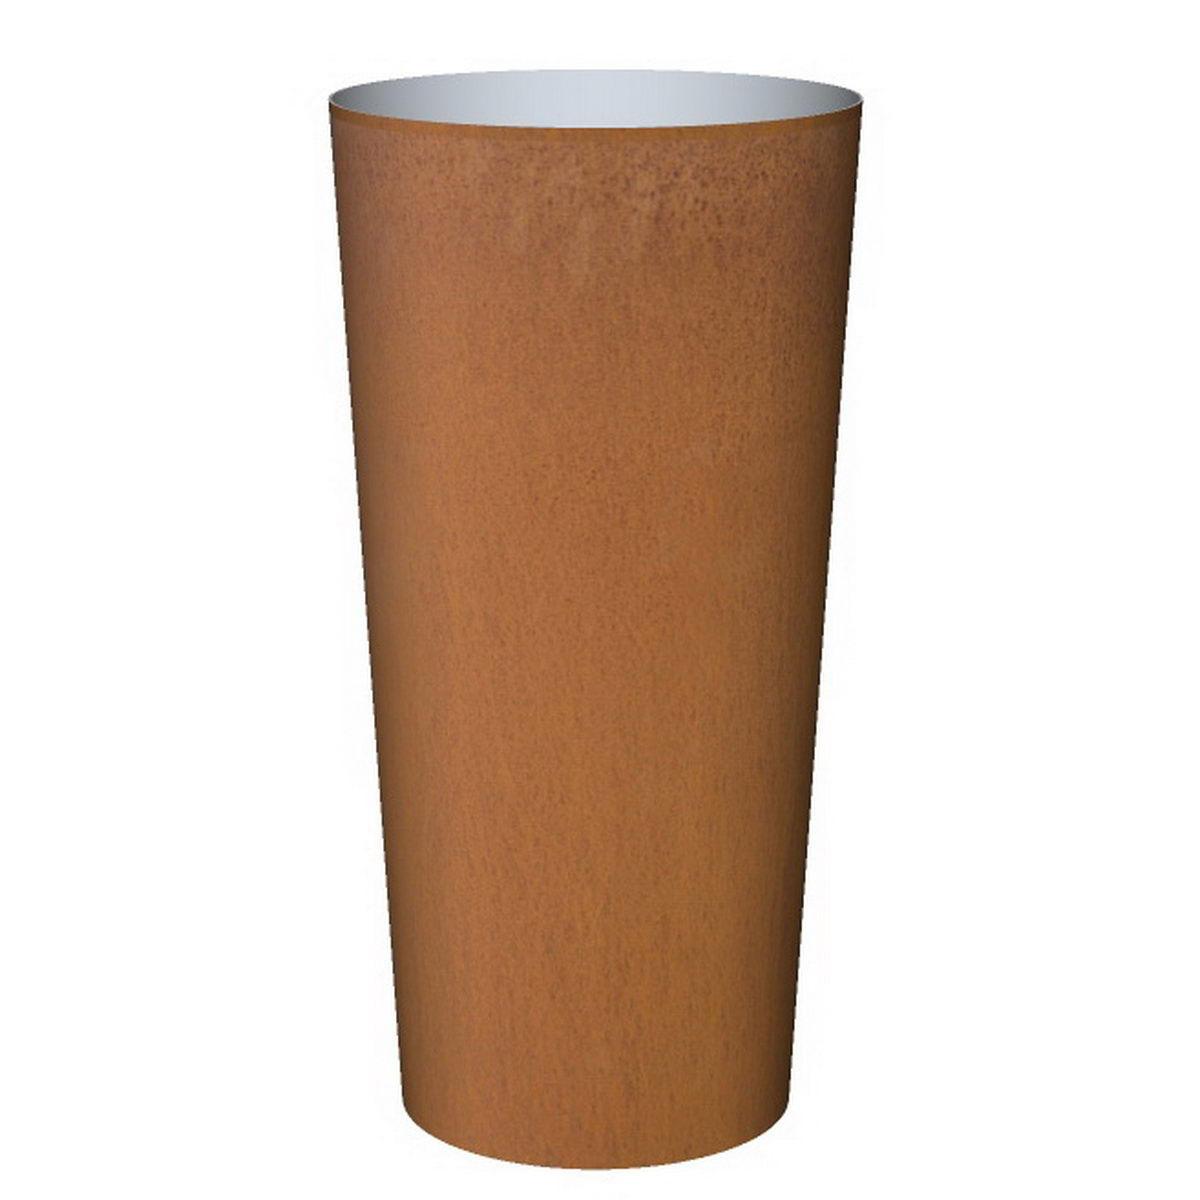 Cortenstyle Basic Conica Tall Planter IN\OUT